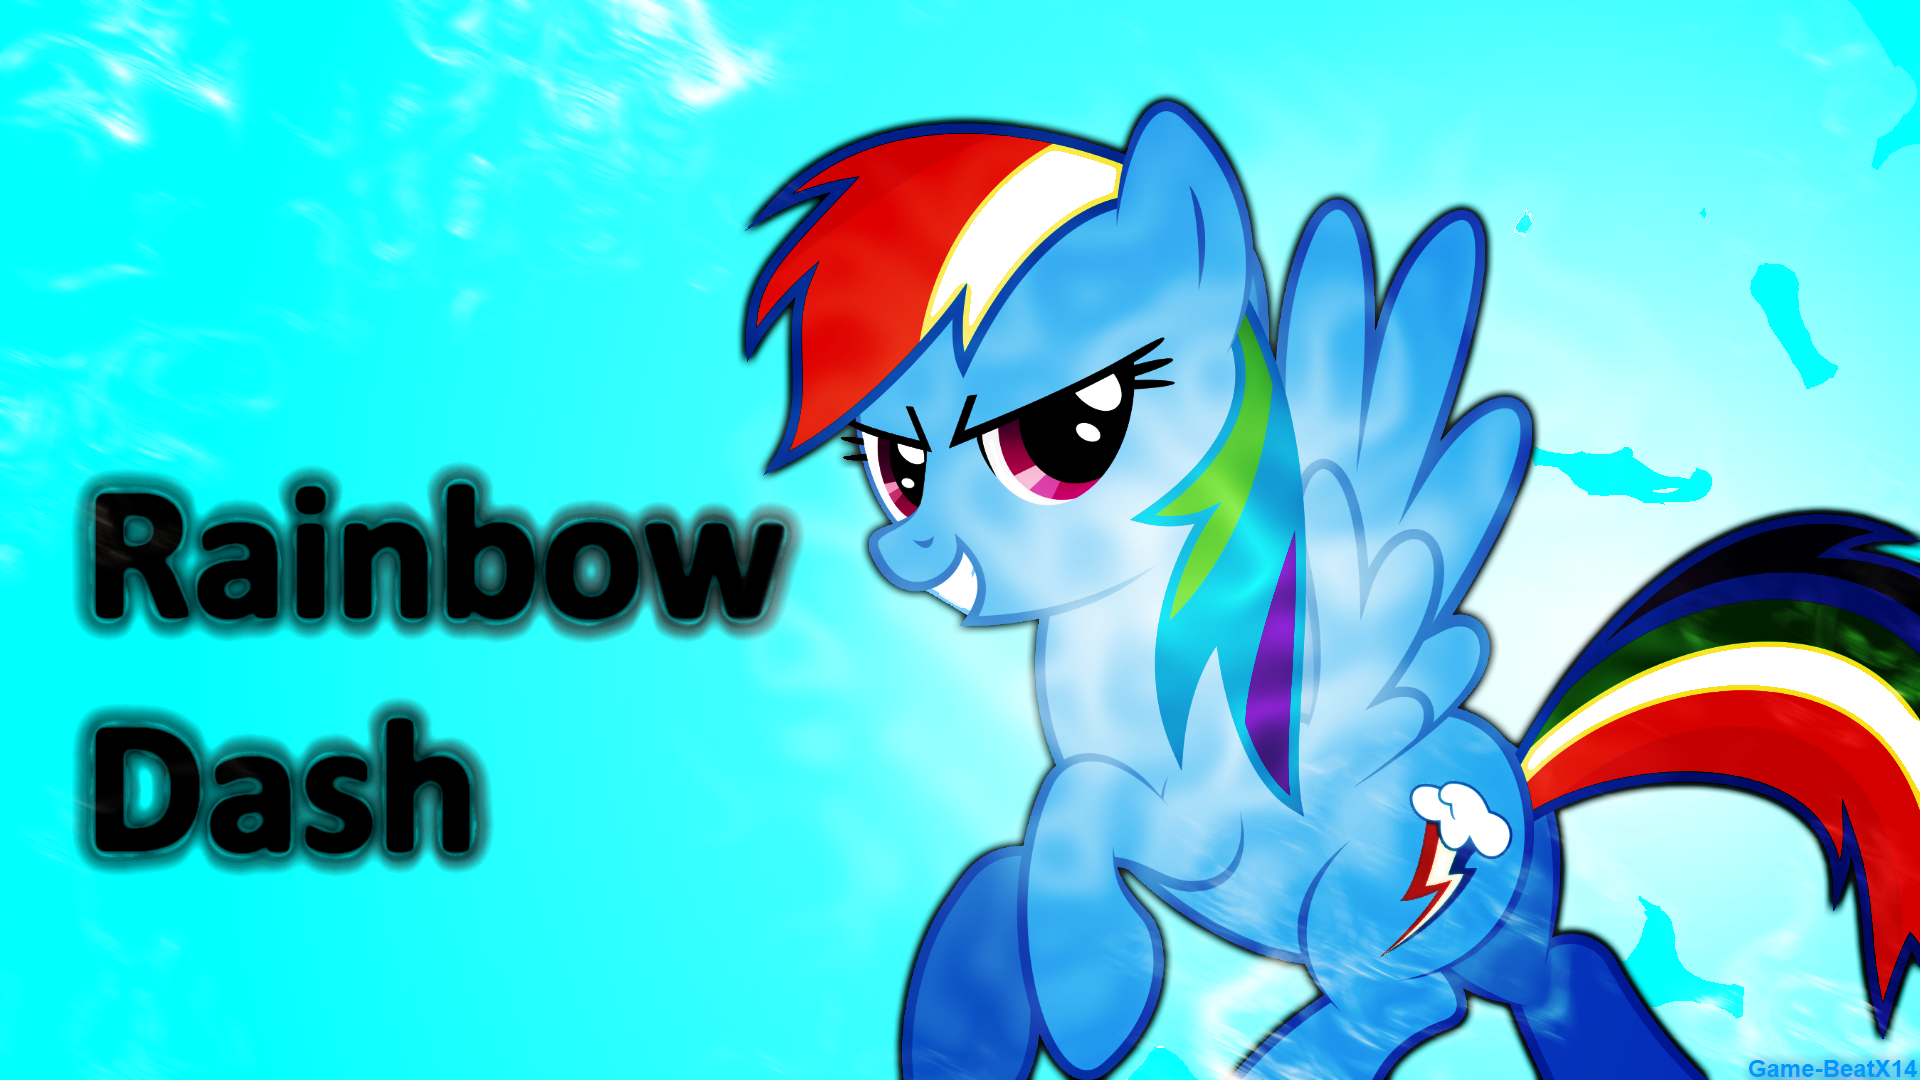 Rainbow Dash Wallpaper by Fehlung and Game-BeatX14 | My Little Pony ...